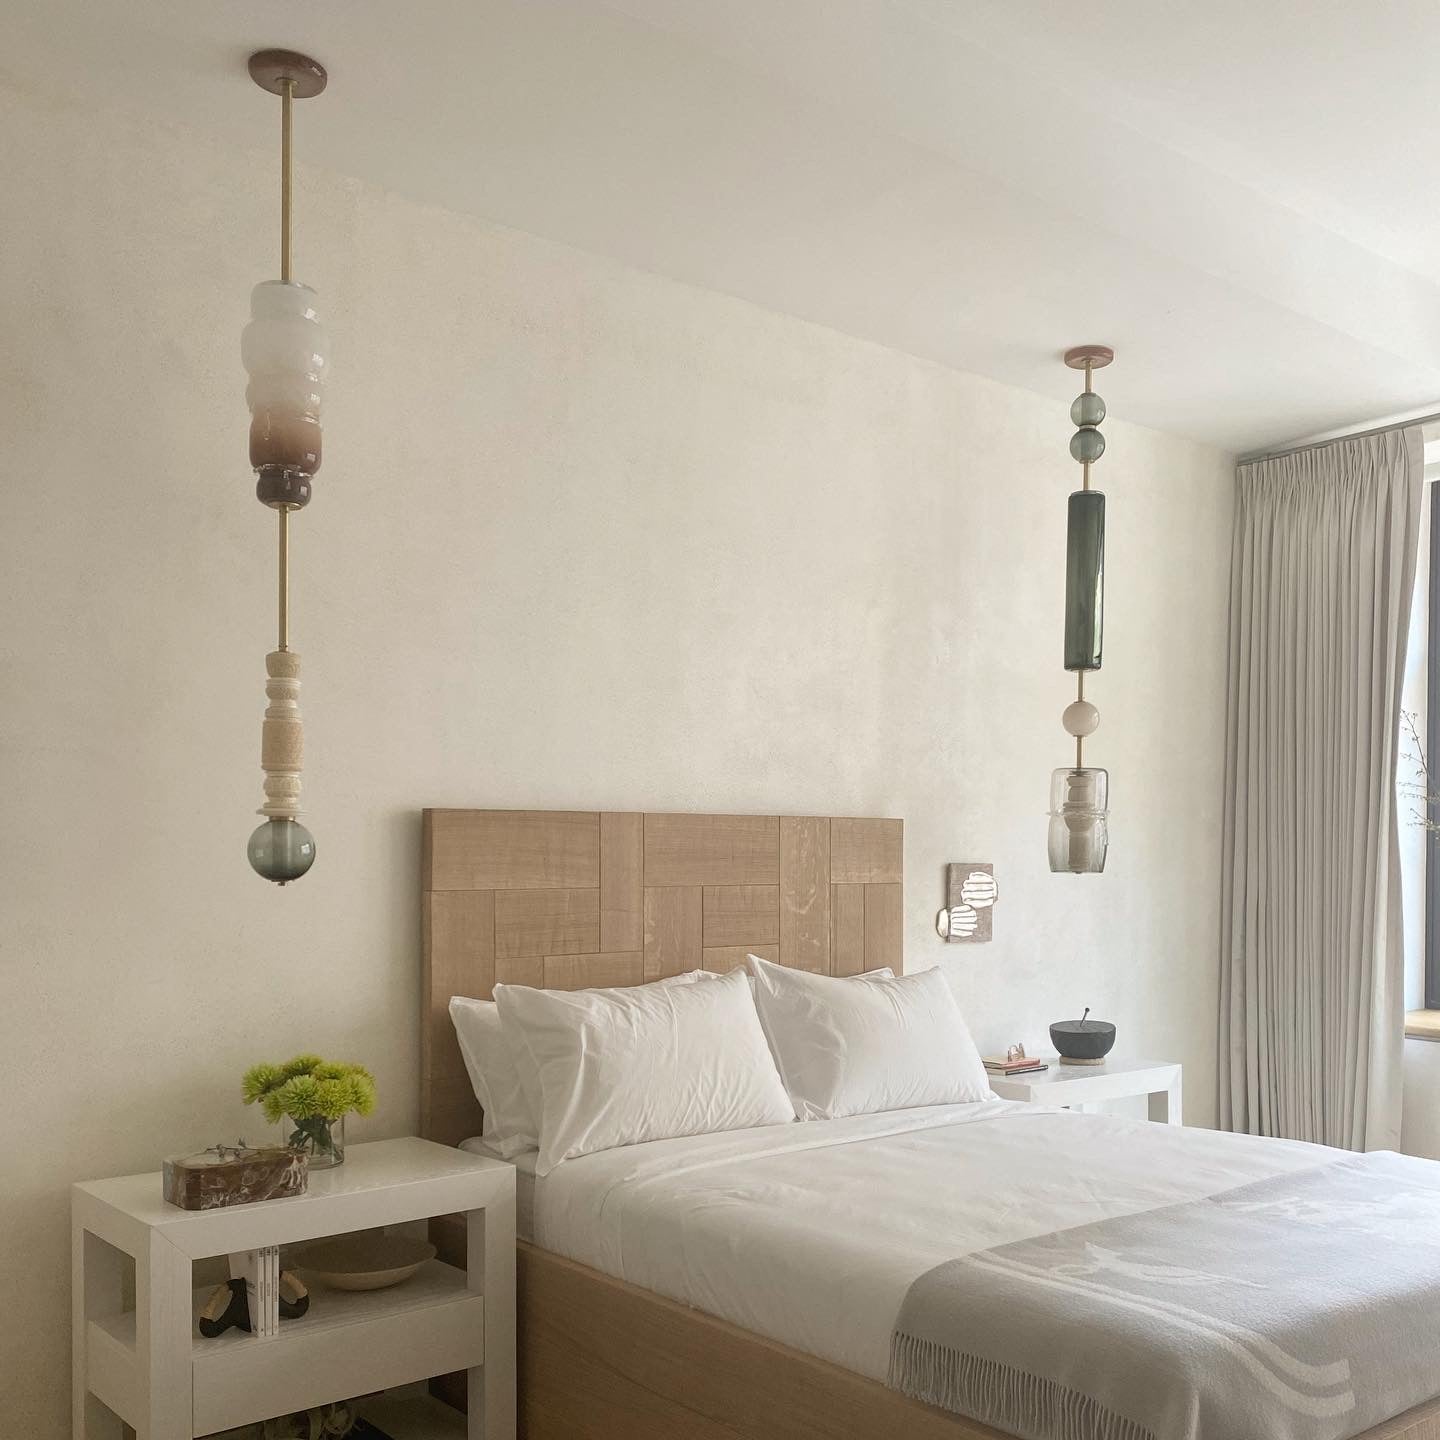 WOVEN COLONY- Bedside Pendants for West Village Home